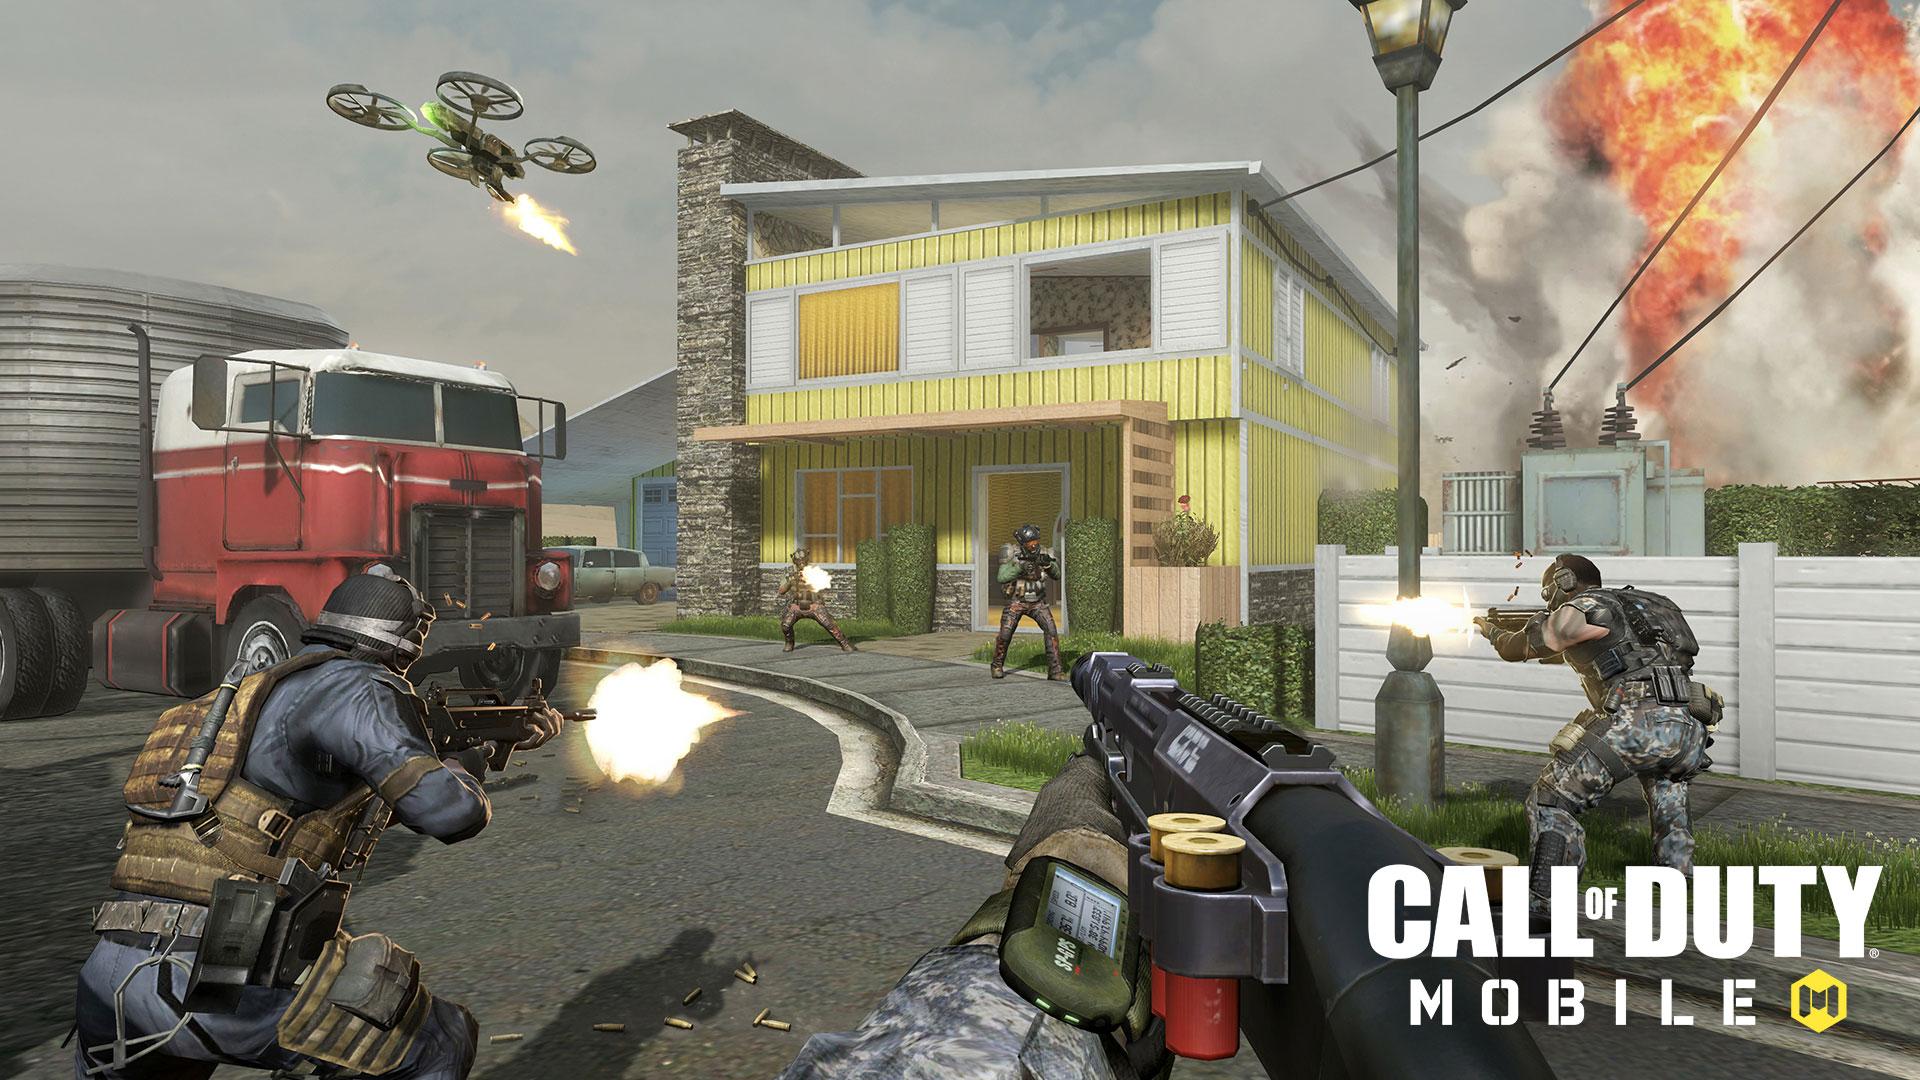 More Details About Call of Duty Mobile Emerge As Beta